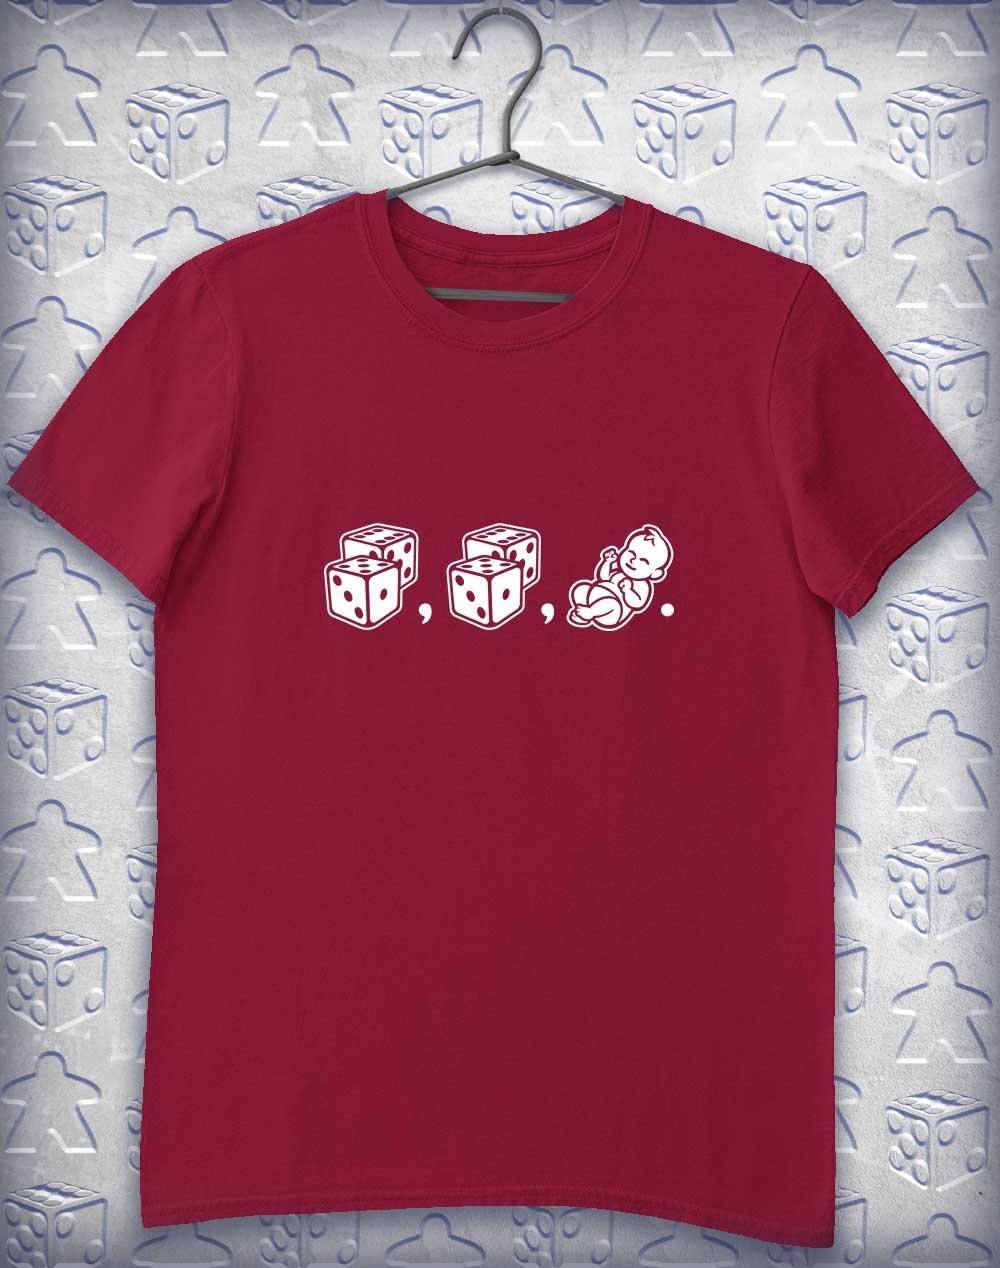 Dice Dice Baby (Plural) Alphagamer T-Shirt S / Cardinal Red  - Off World Tees